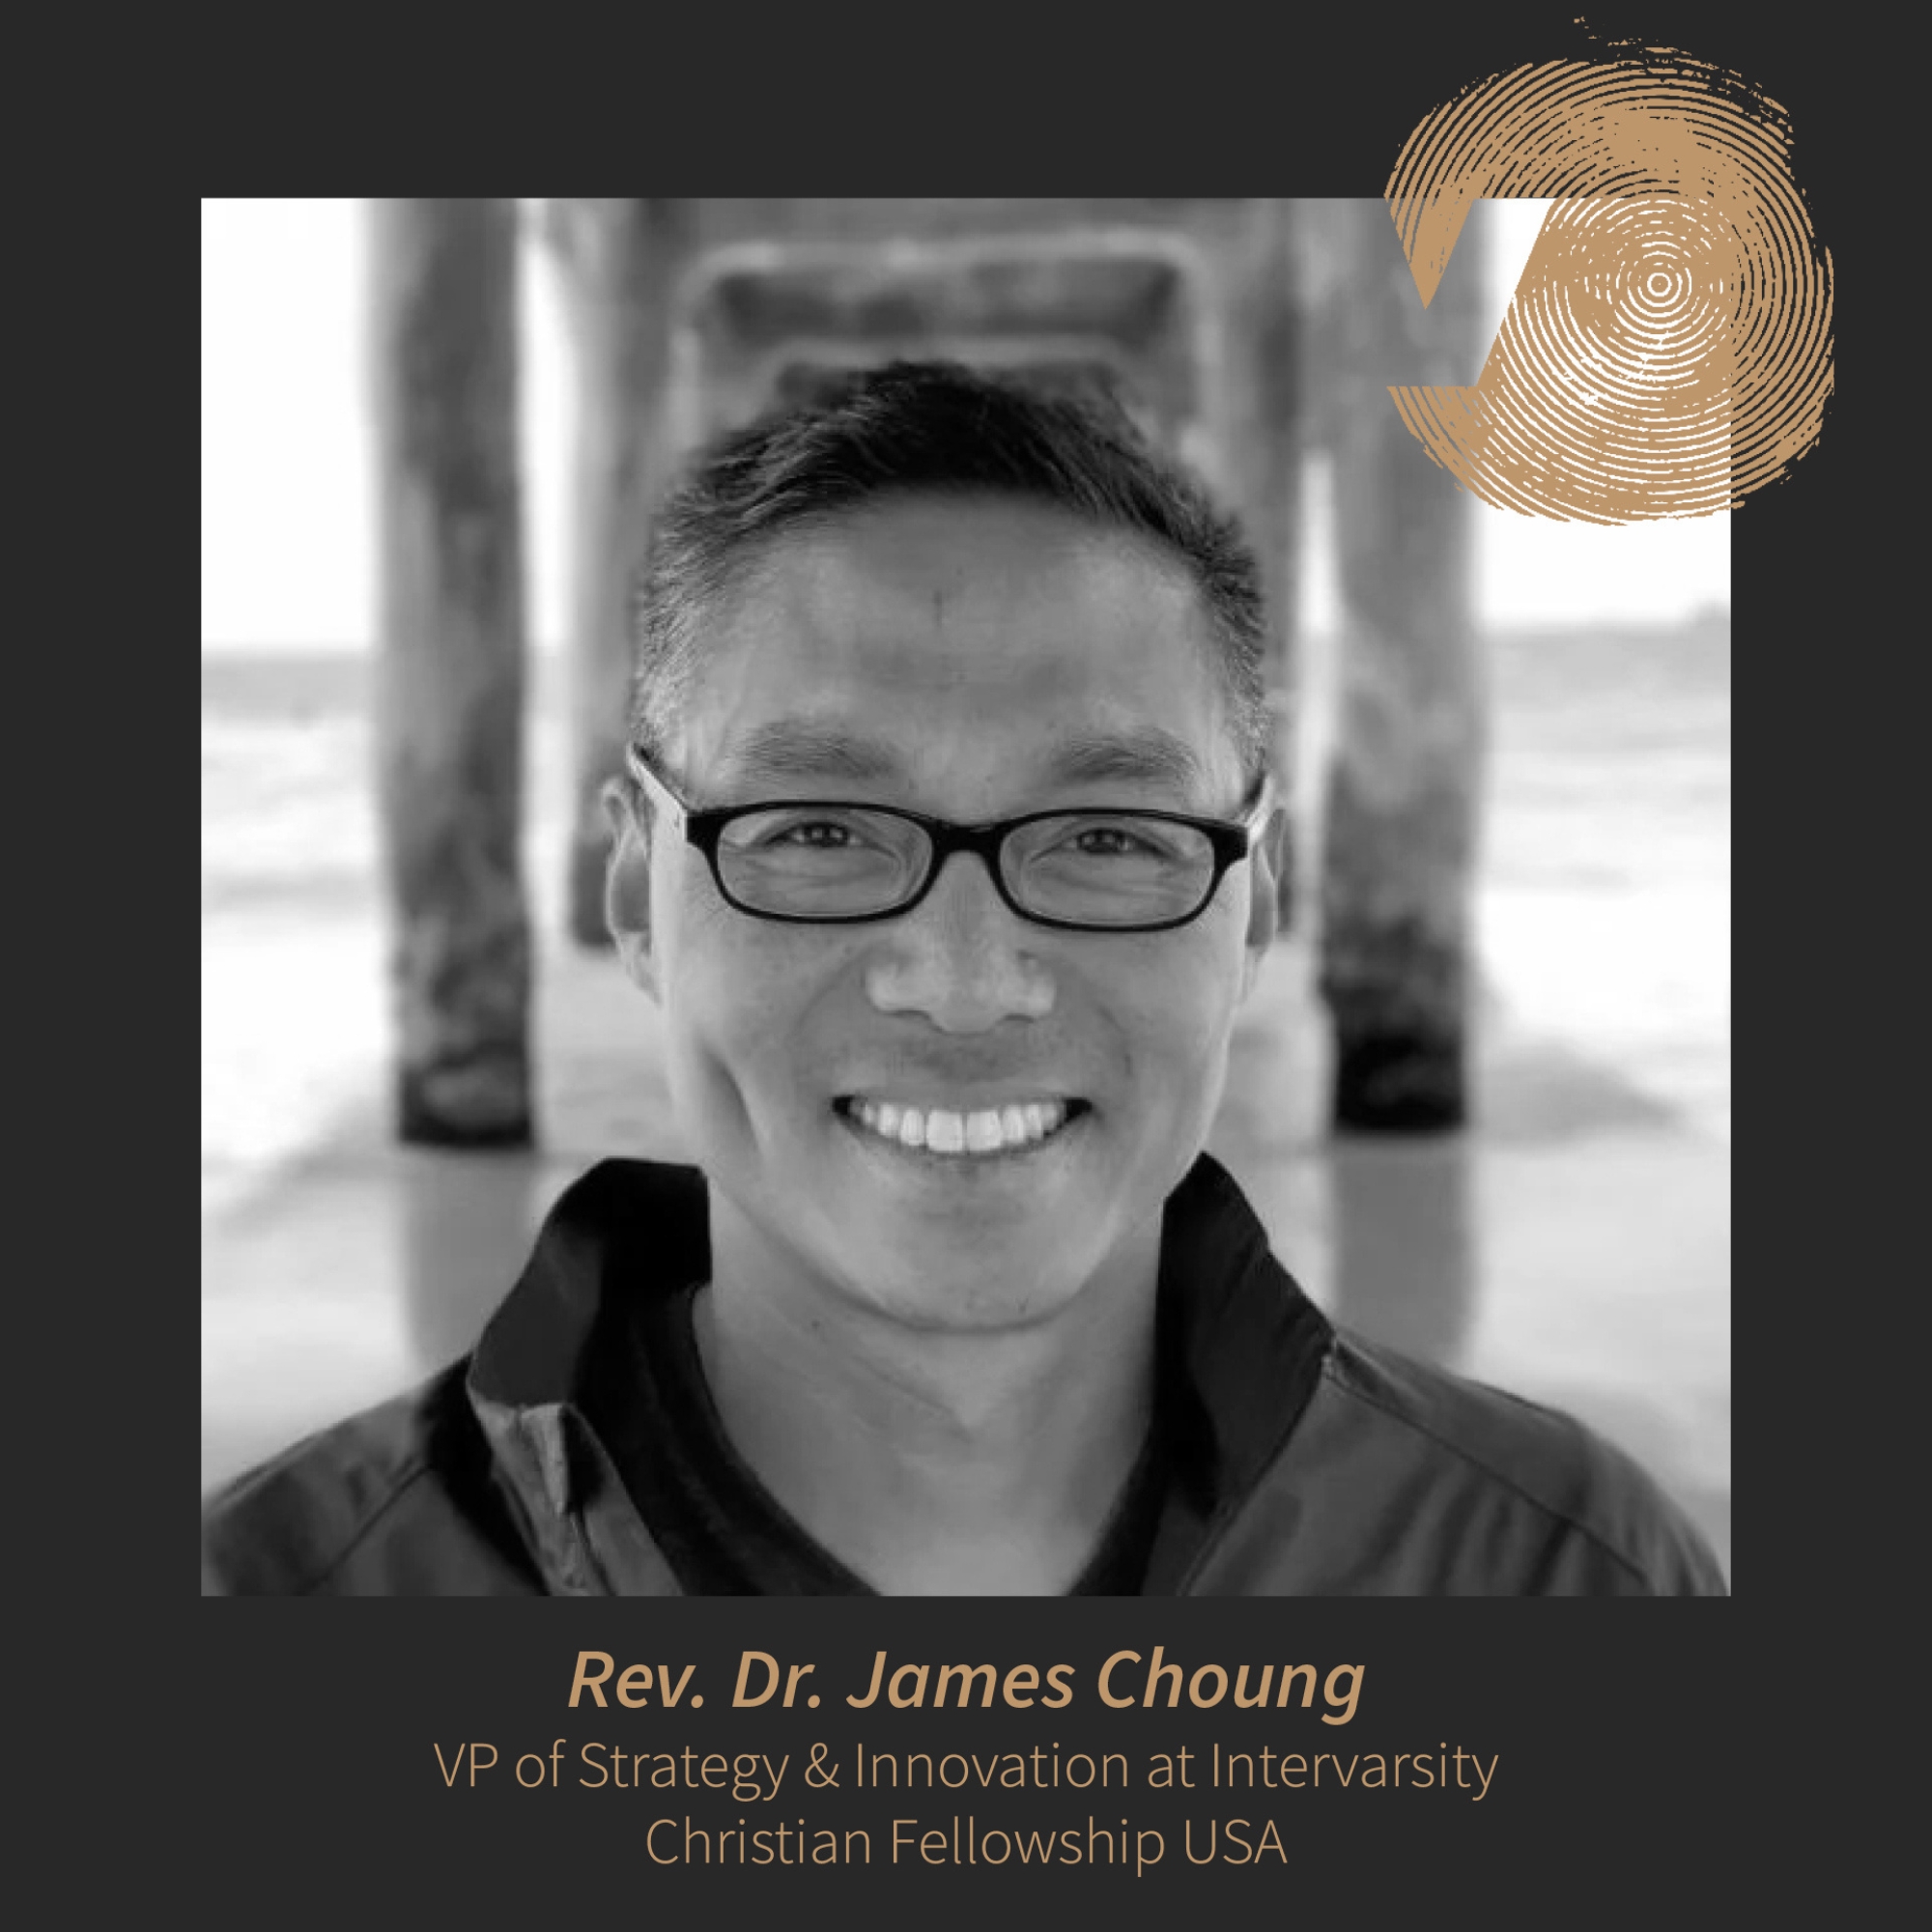 From MIT to Full Time Ministry: James Choung from Intervarsity